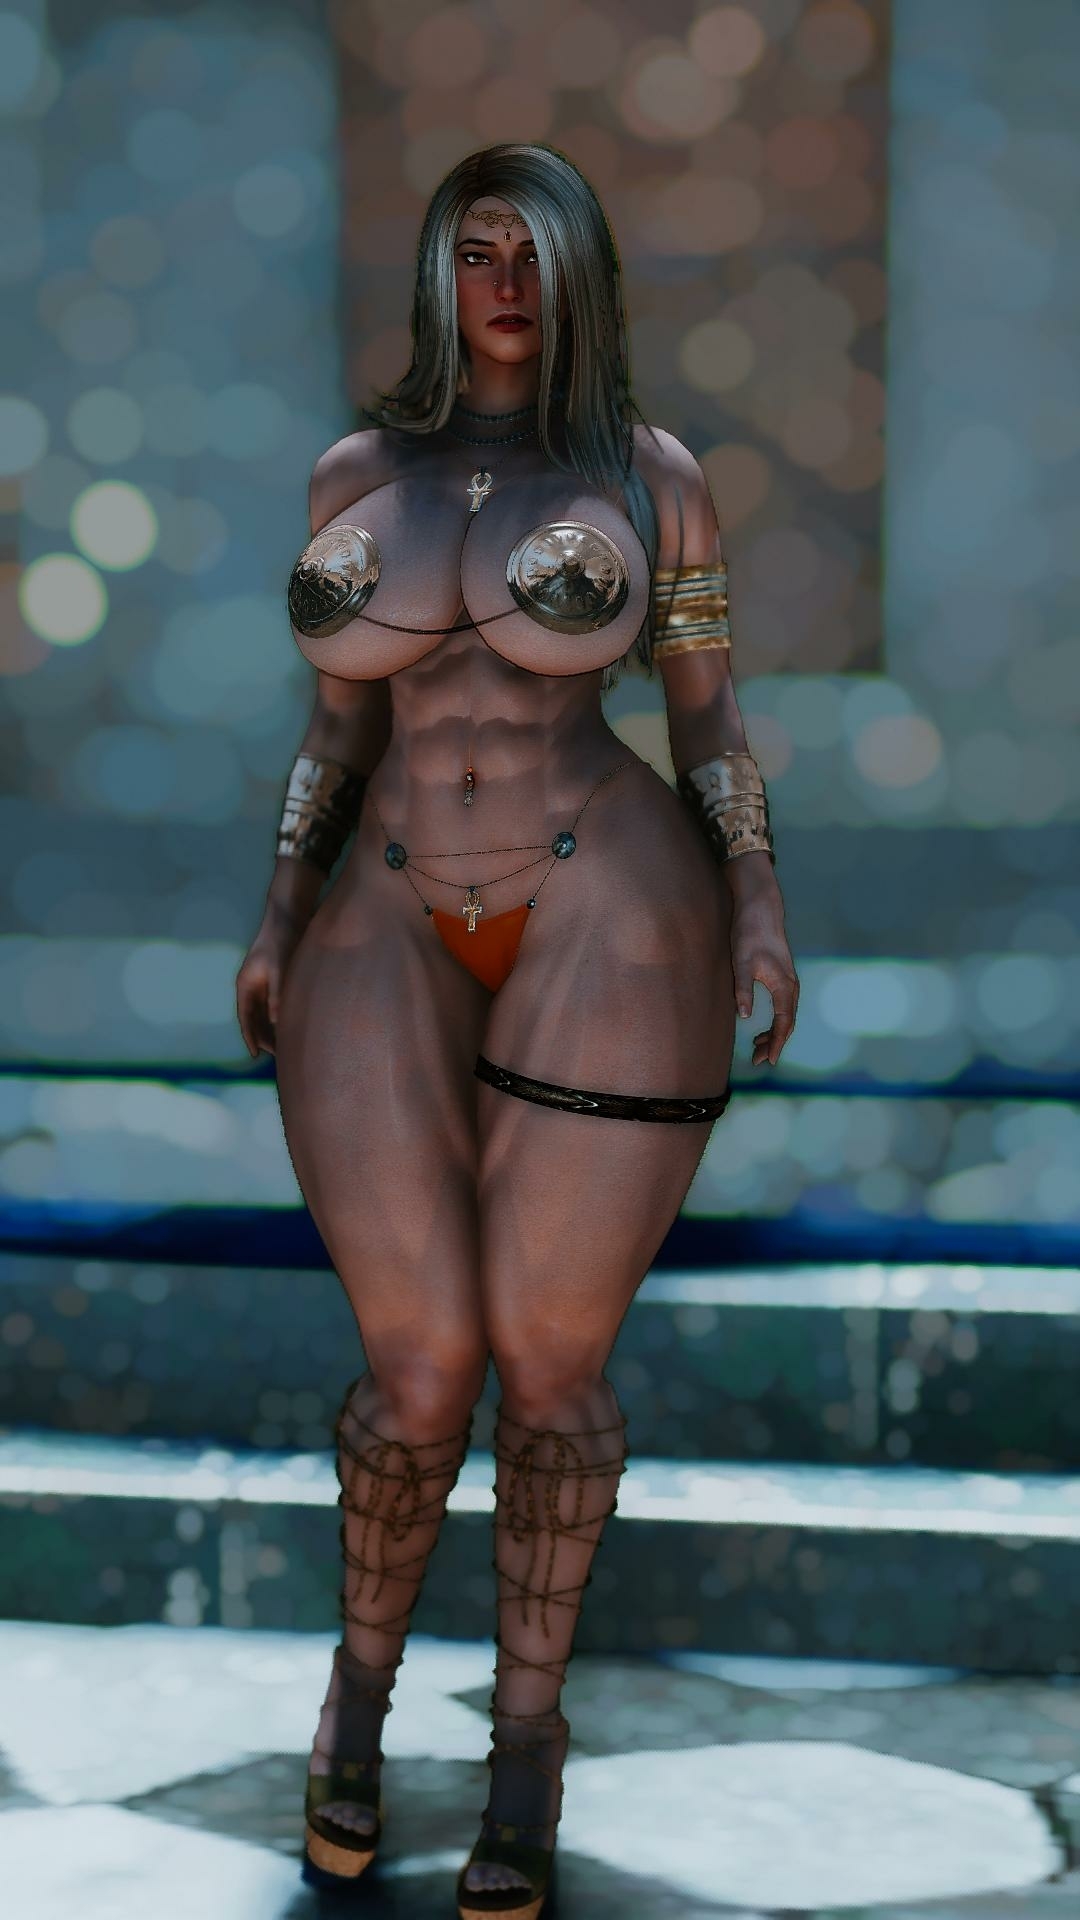 Hot and sexy Amazon with muscular body - Skyrim Modding Skyrim Amazon Sexy Muscular Girl Muscles Thicc Thighs Viking Big Booty Big Tits Videogame 2